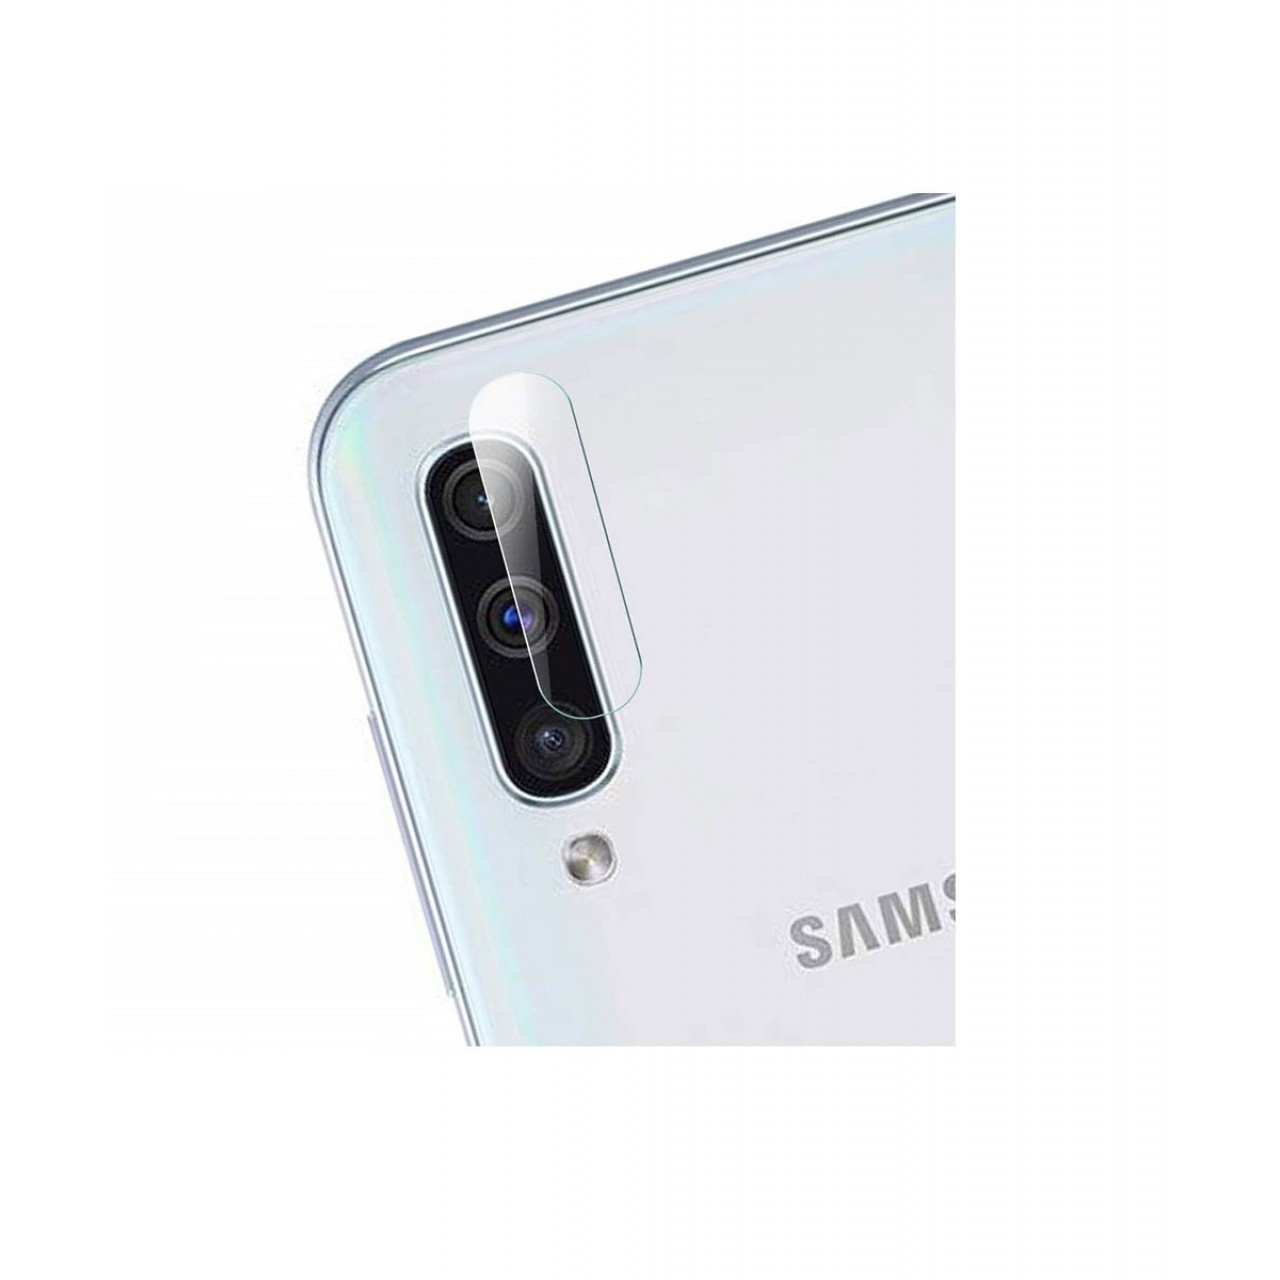 Samsung Galaxy A30 - A30s - A50 - A50s Camera Protection Lens - Προστασία Κάμερας Κινητού